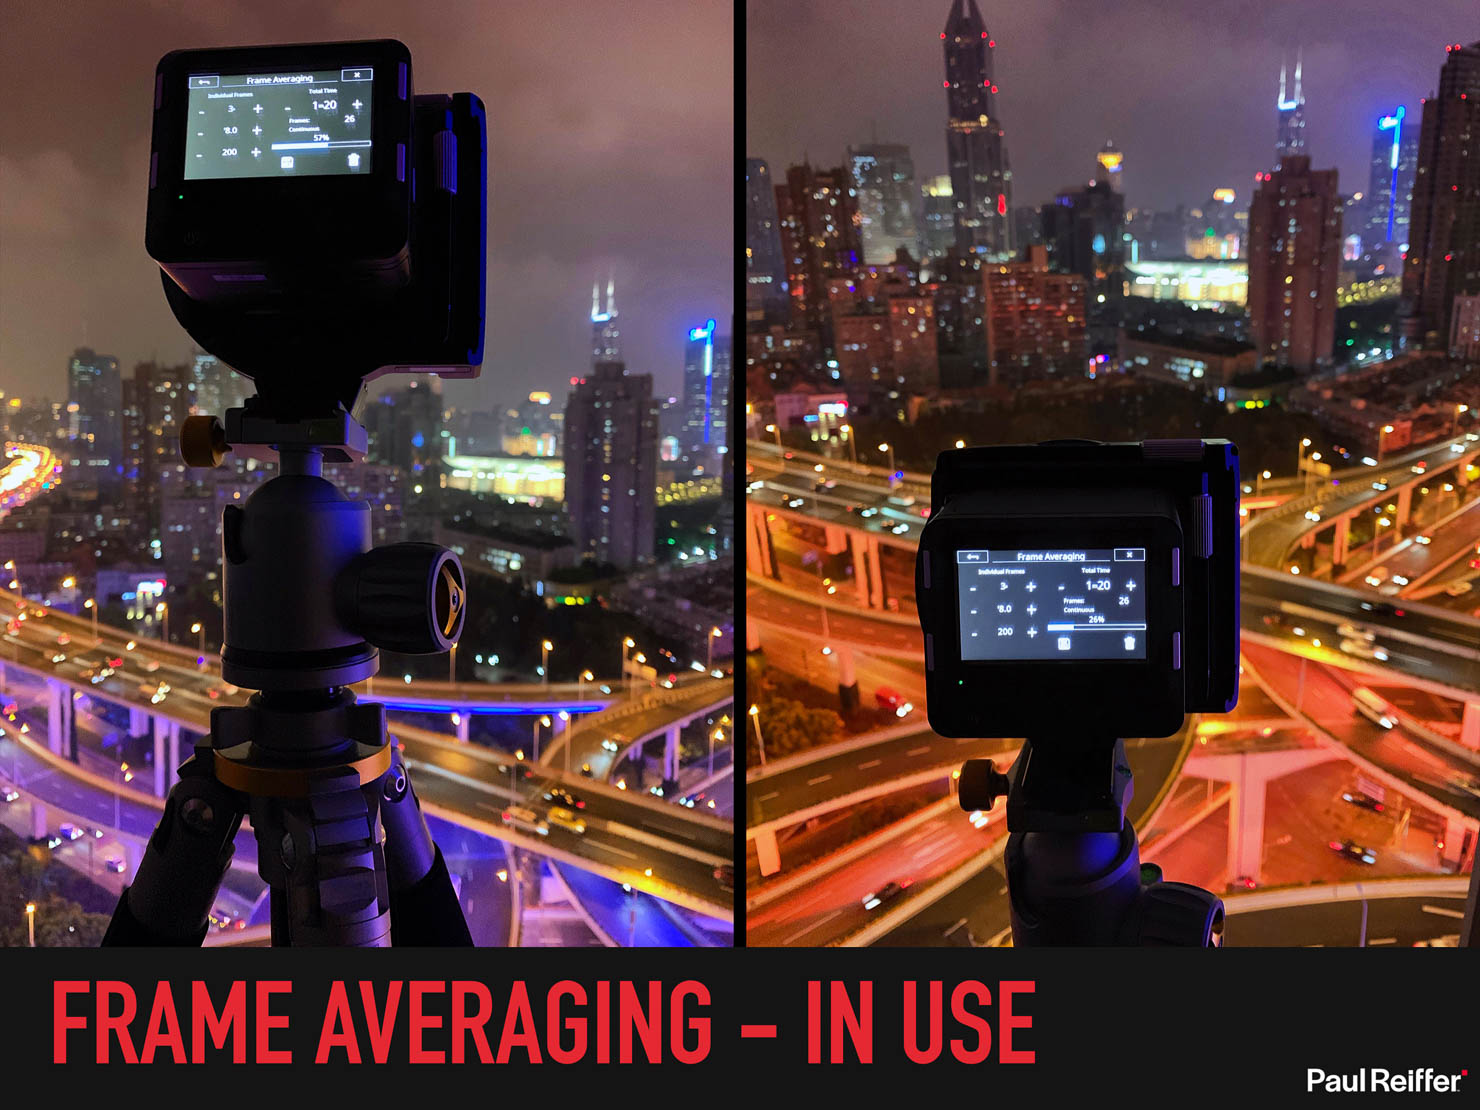 Frame Averaging Complete Guide Paul Reiffer Phase One Presentation Automated Long Exposure Afa How To 032 In Use